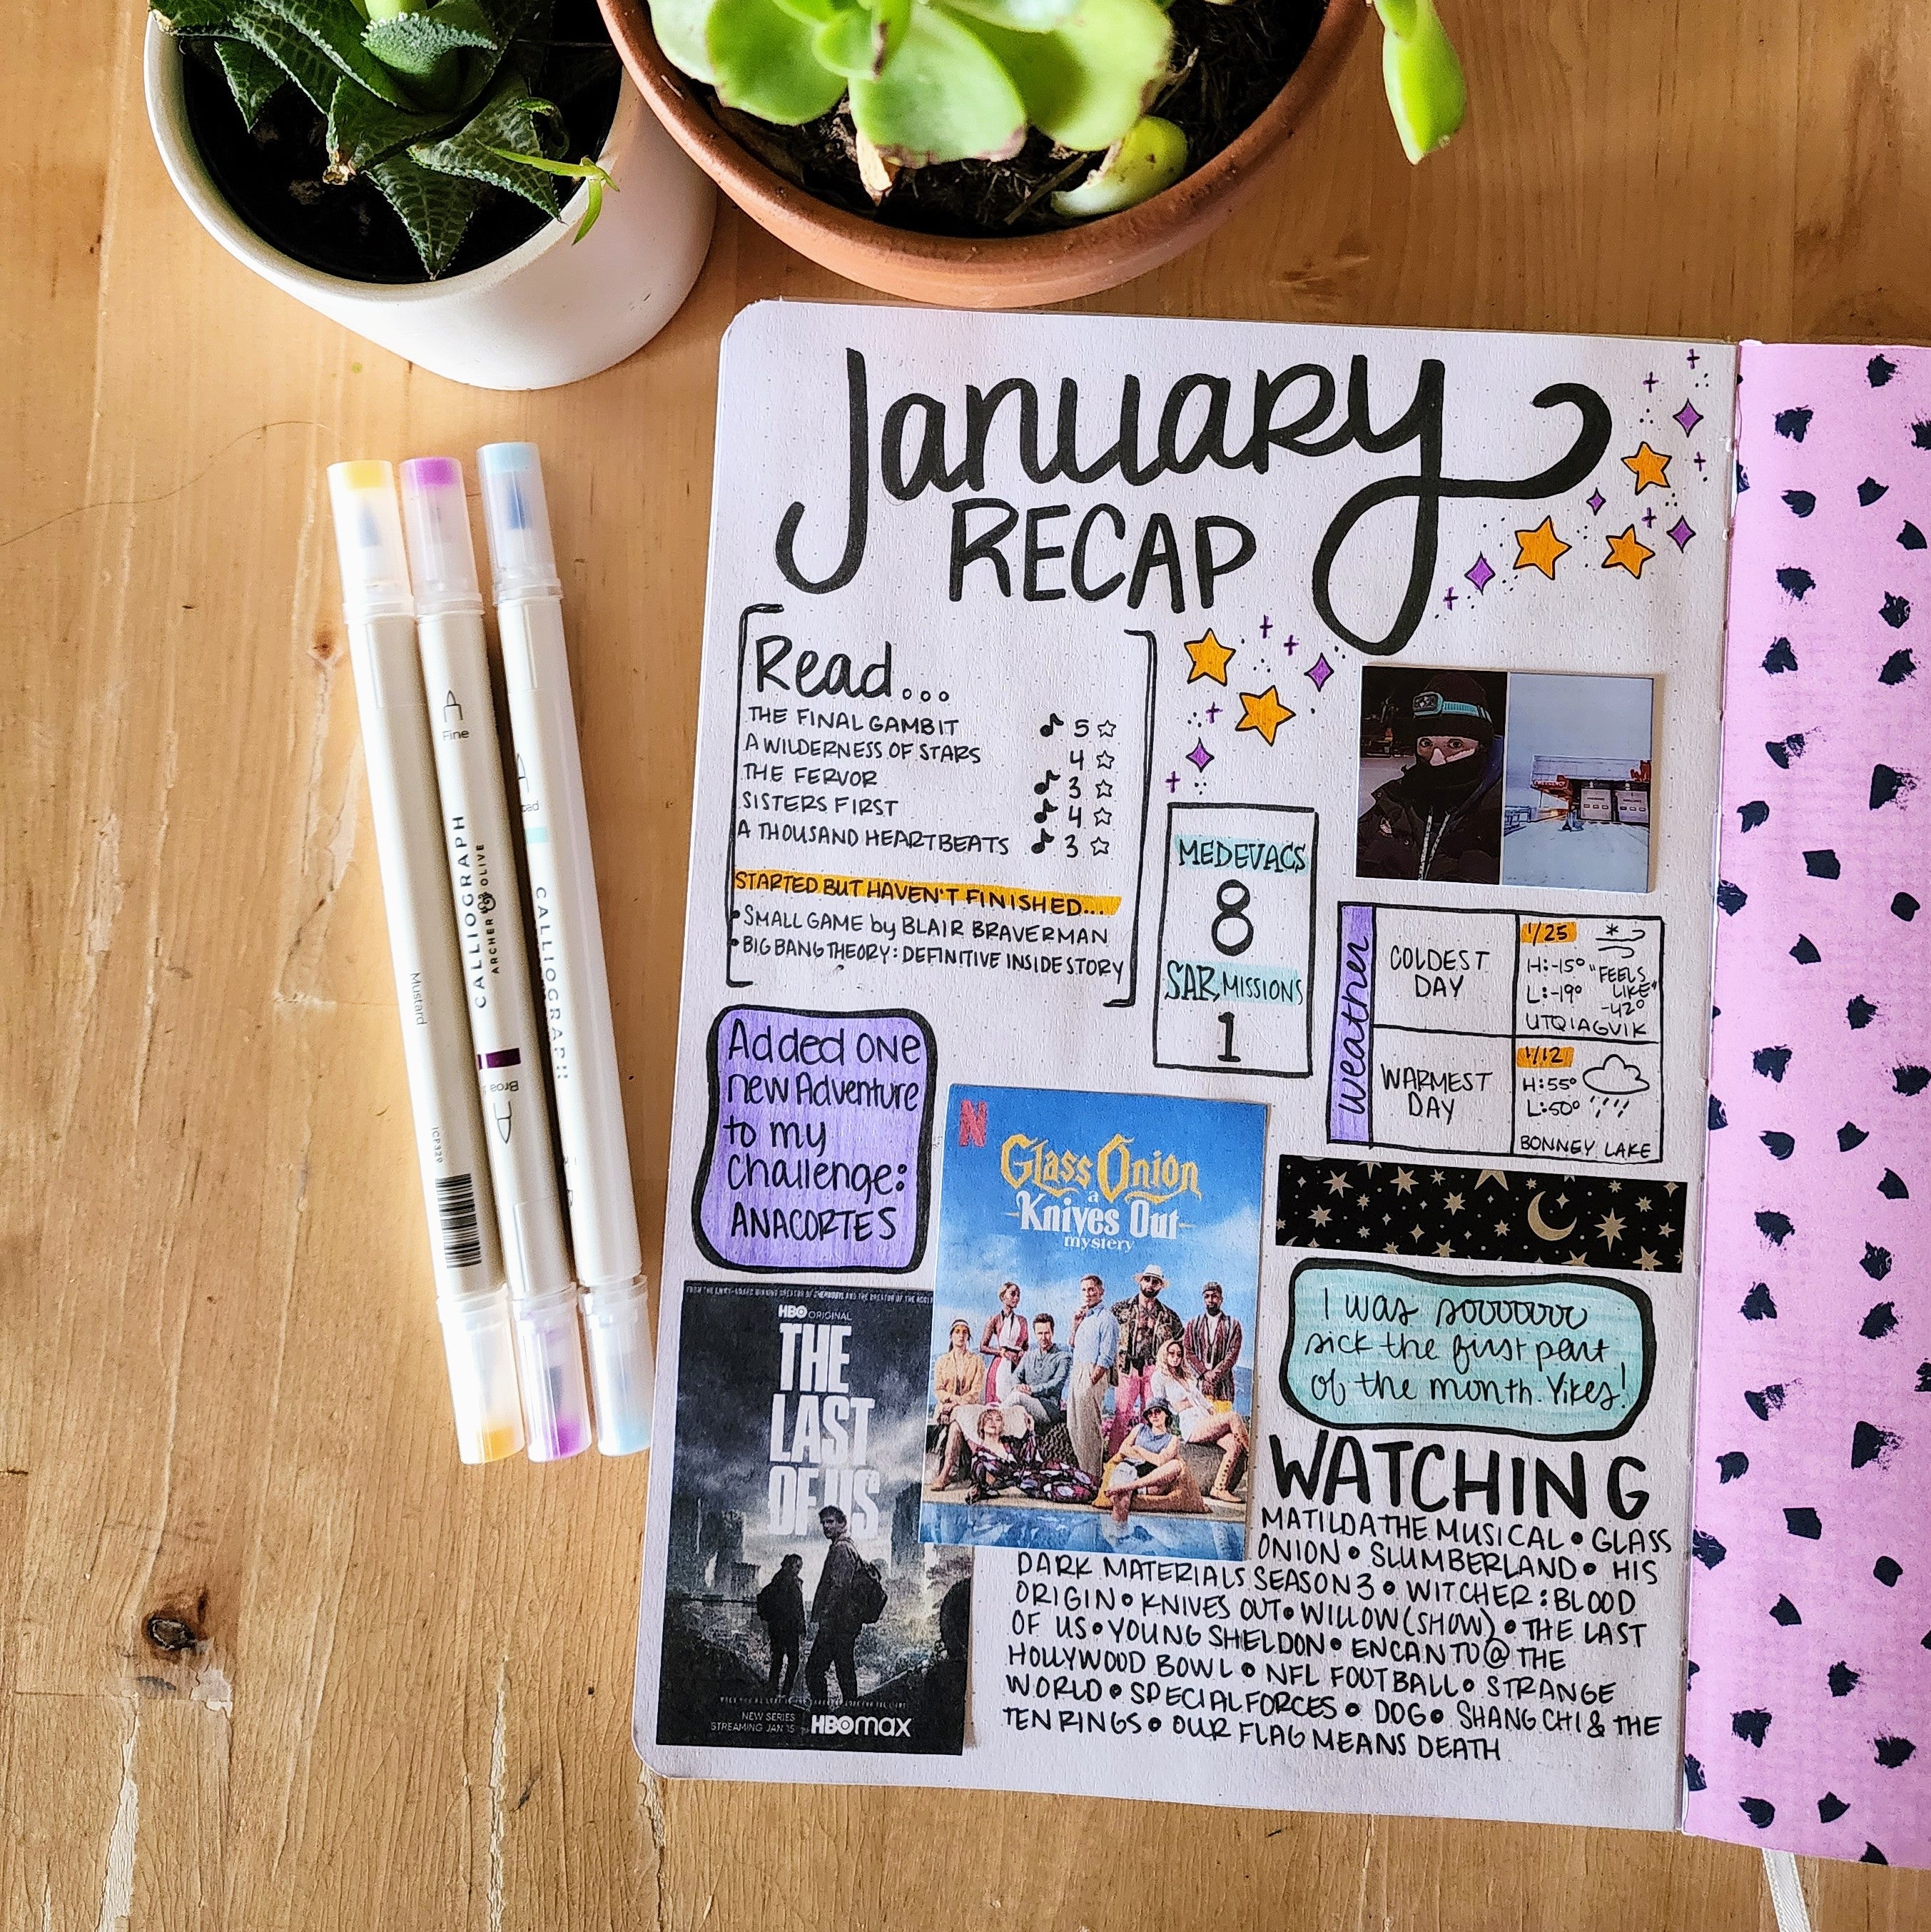 Can Bullet Journaling Save You?